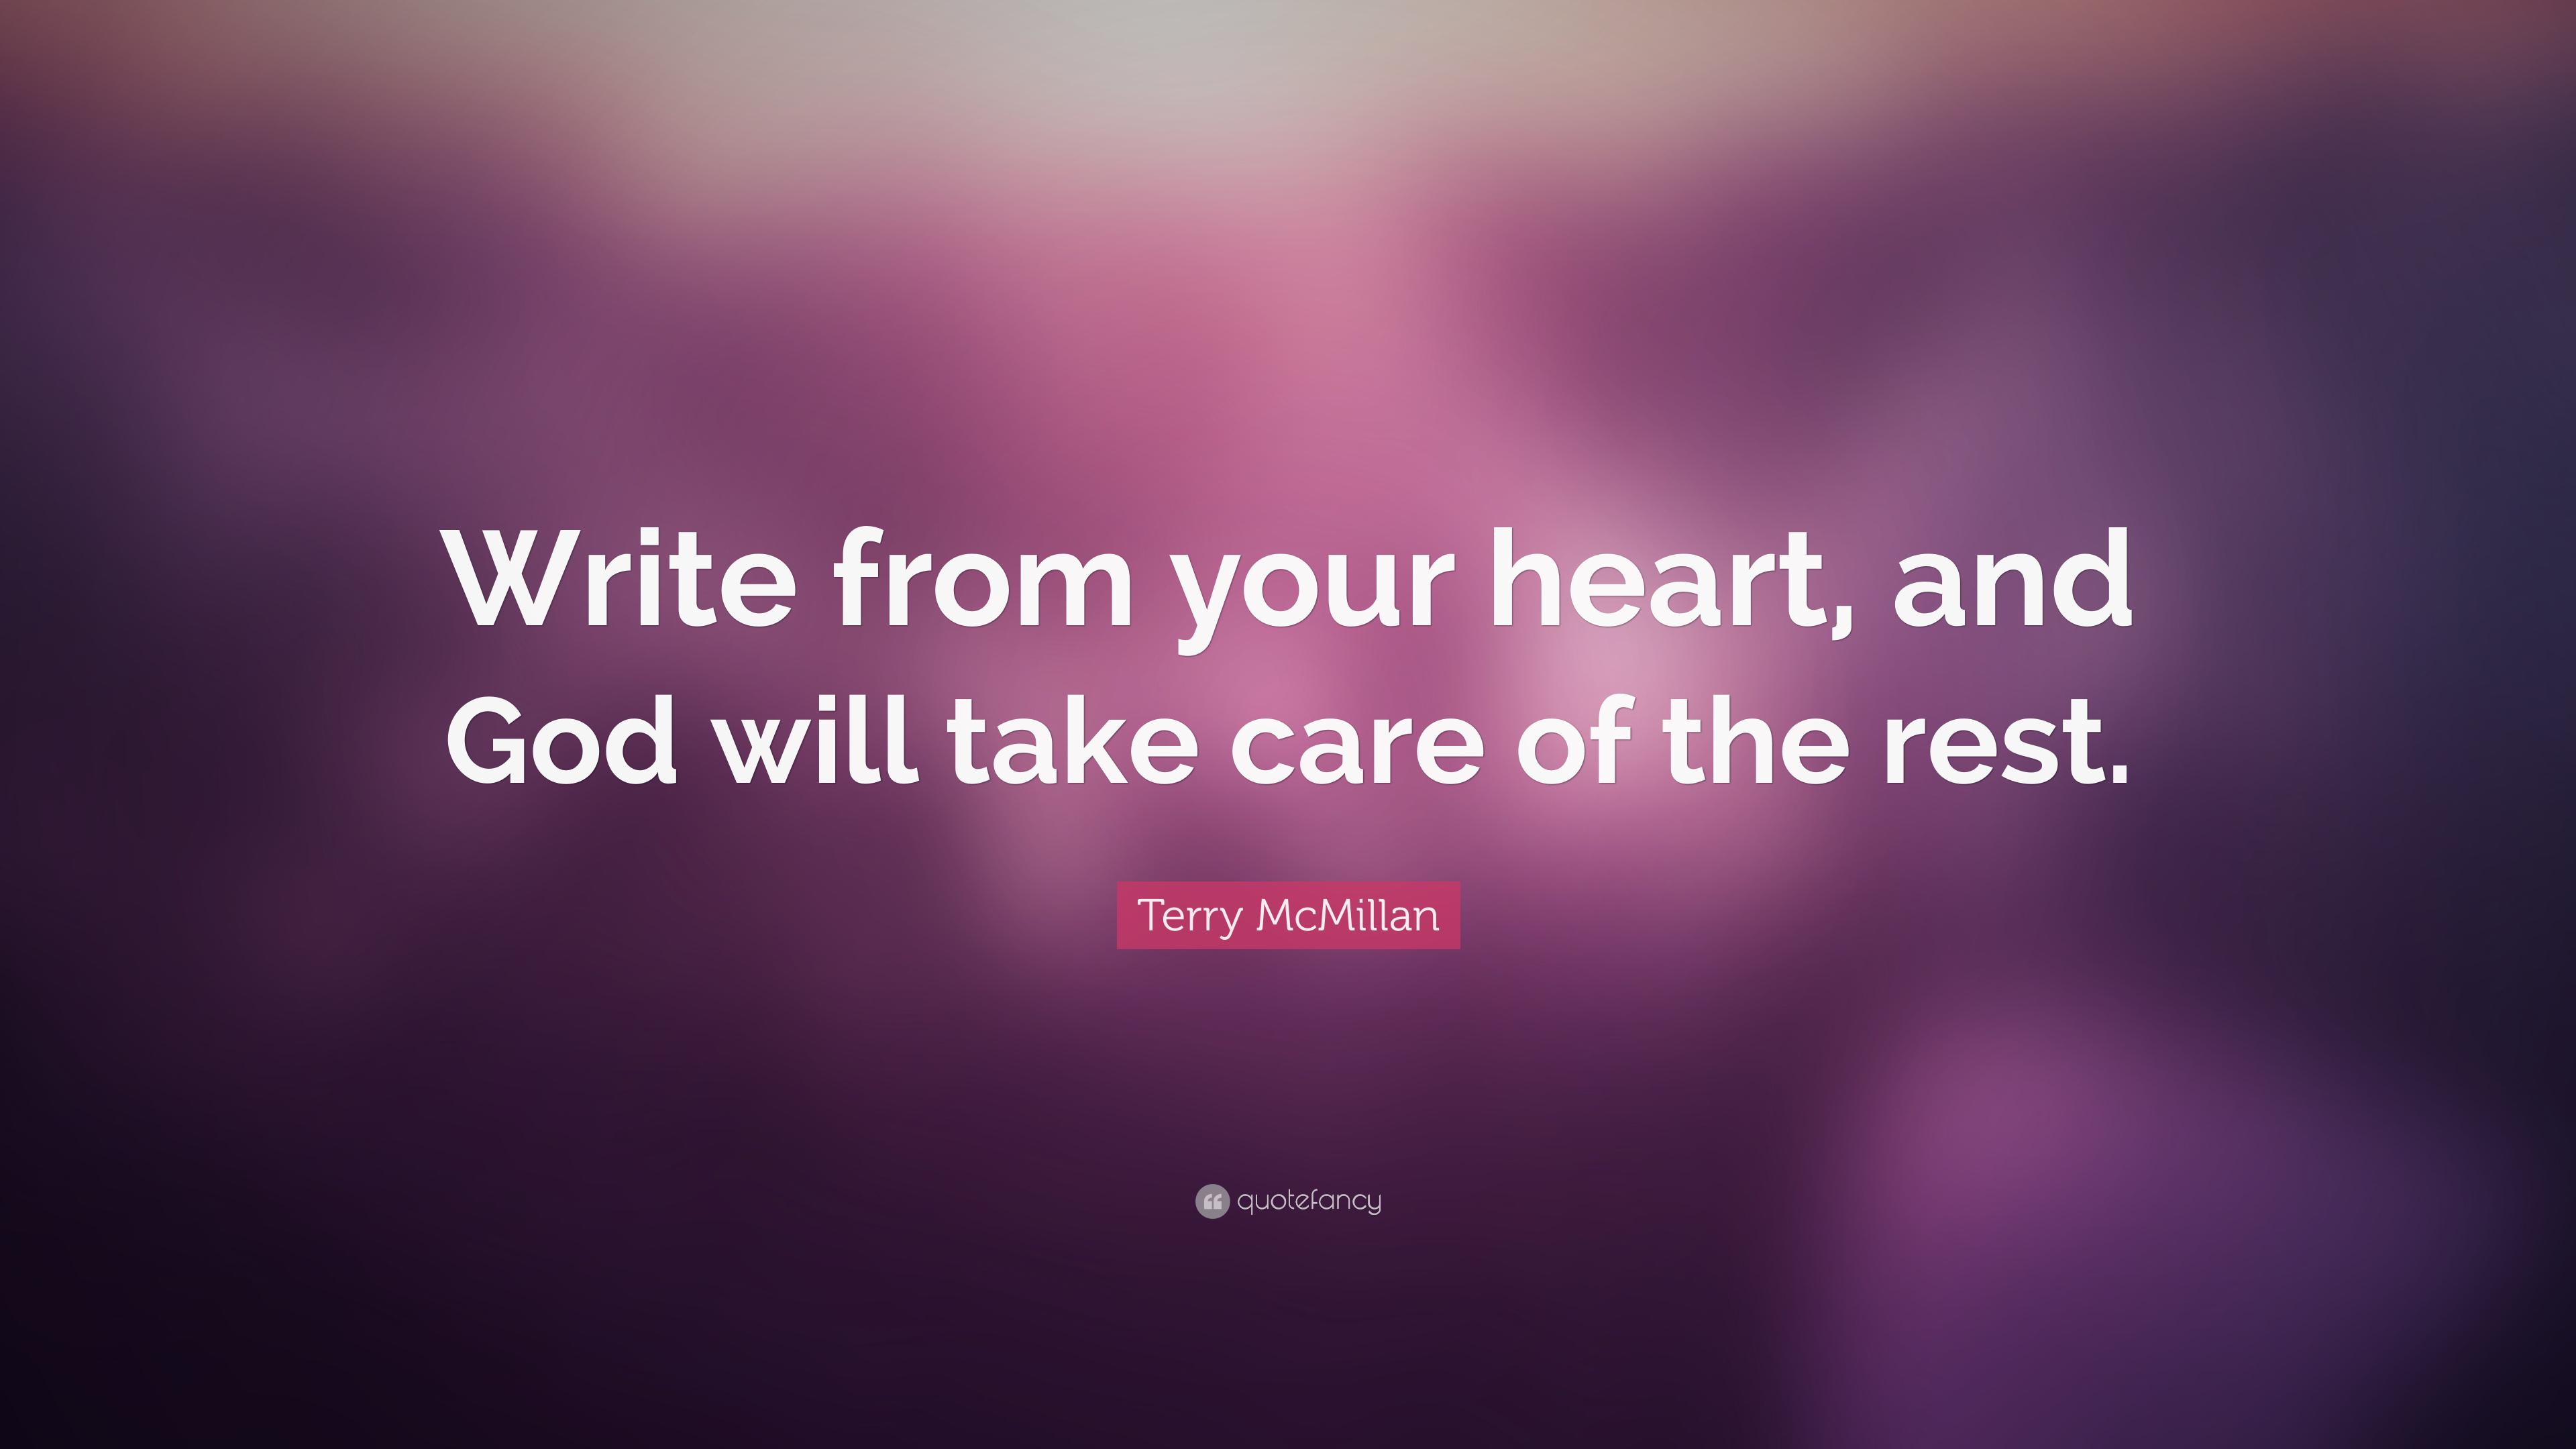 Terry McMillan Quote: “Write from your heart, and God will take